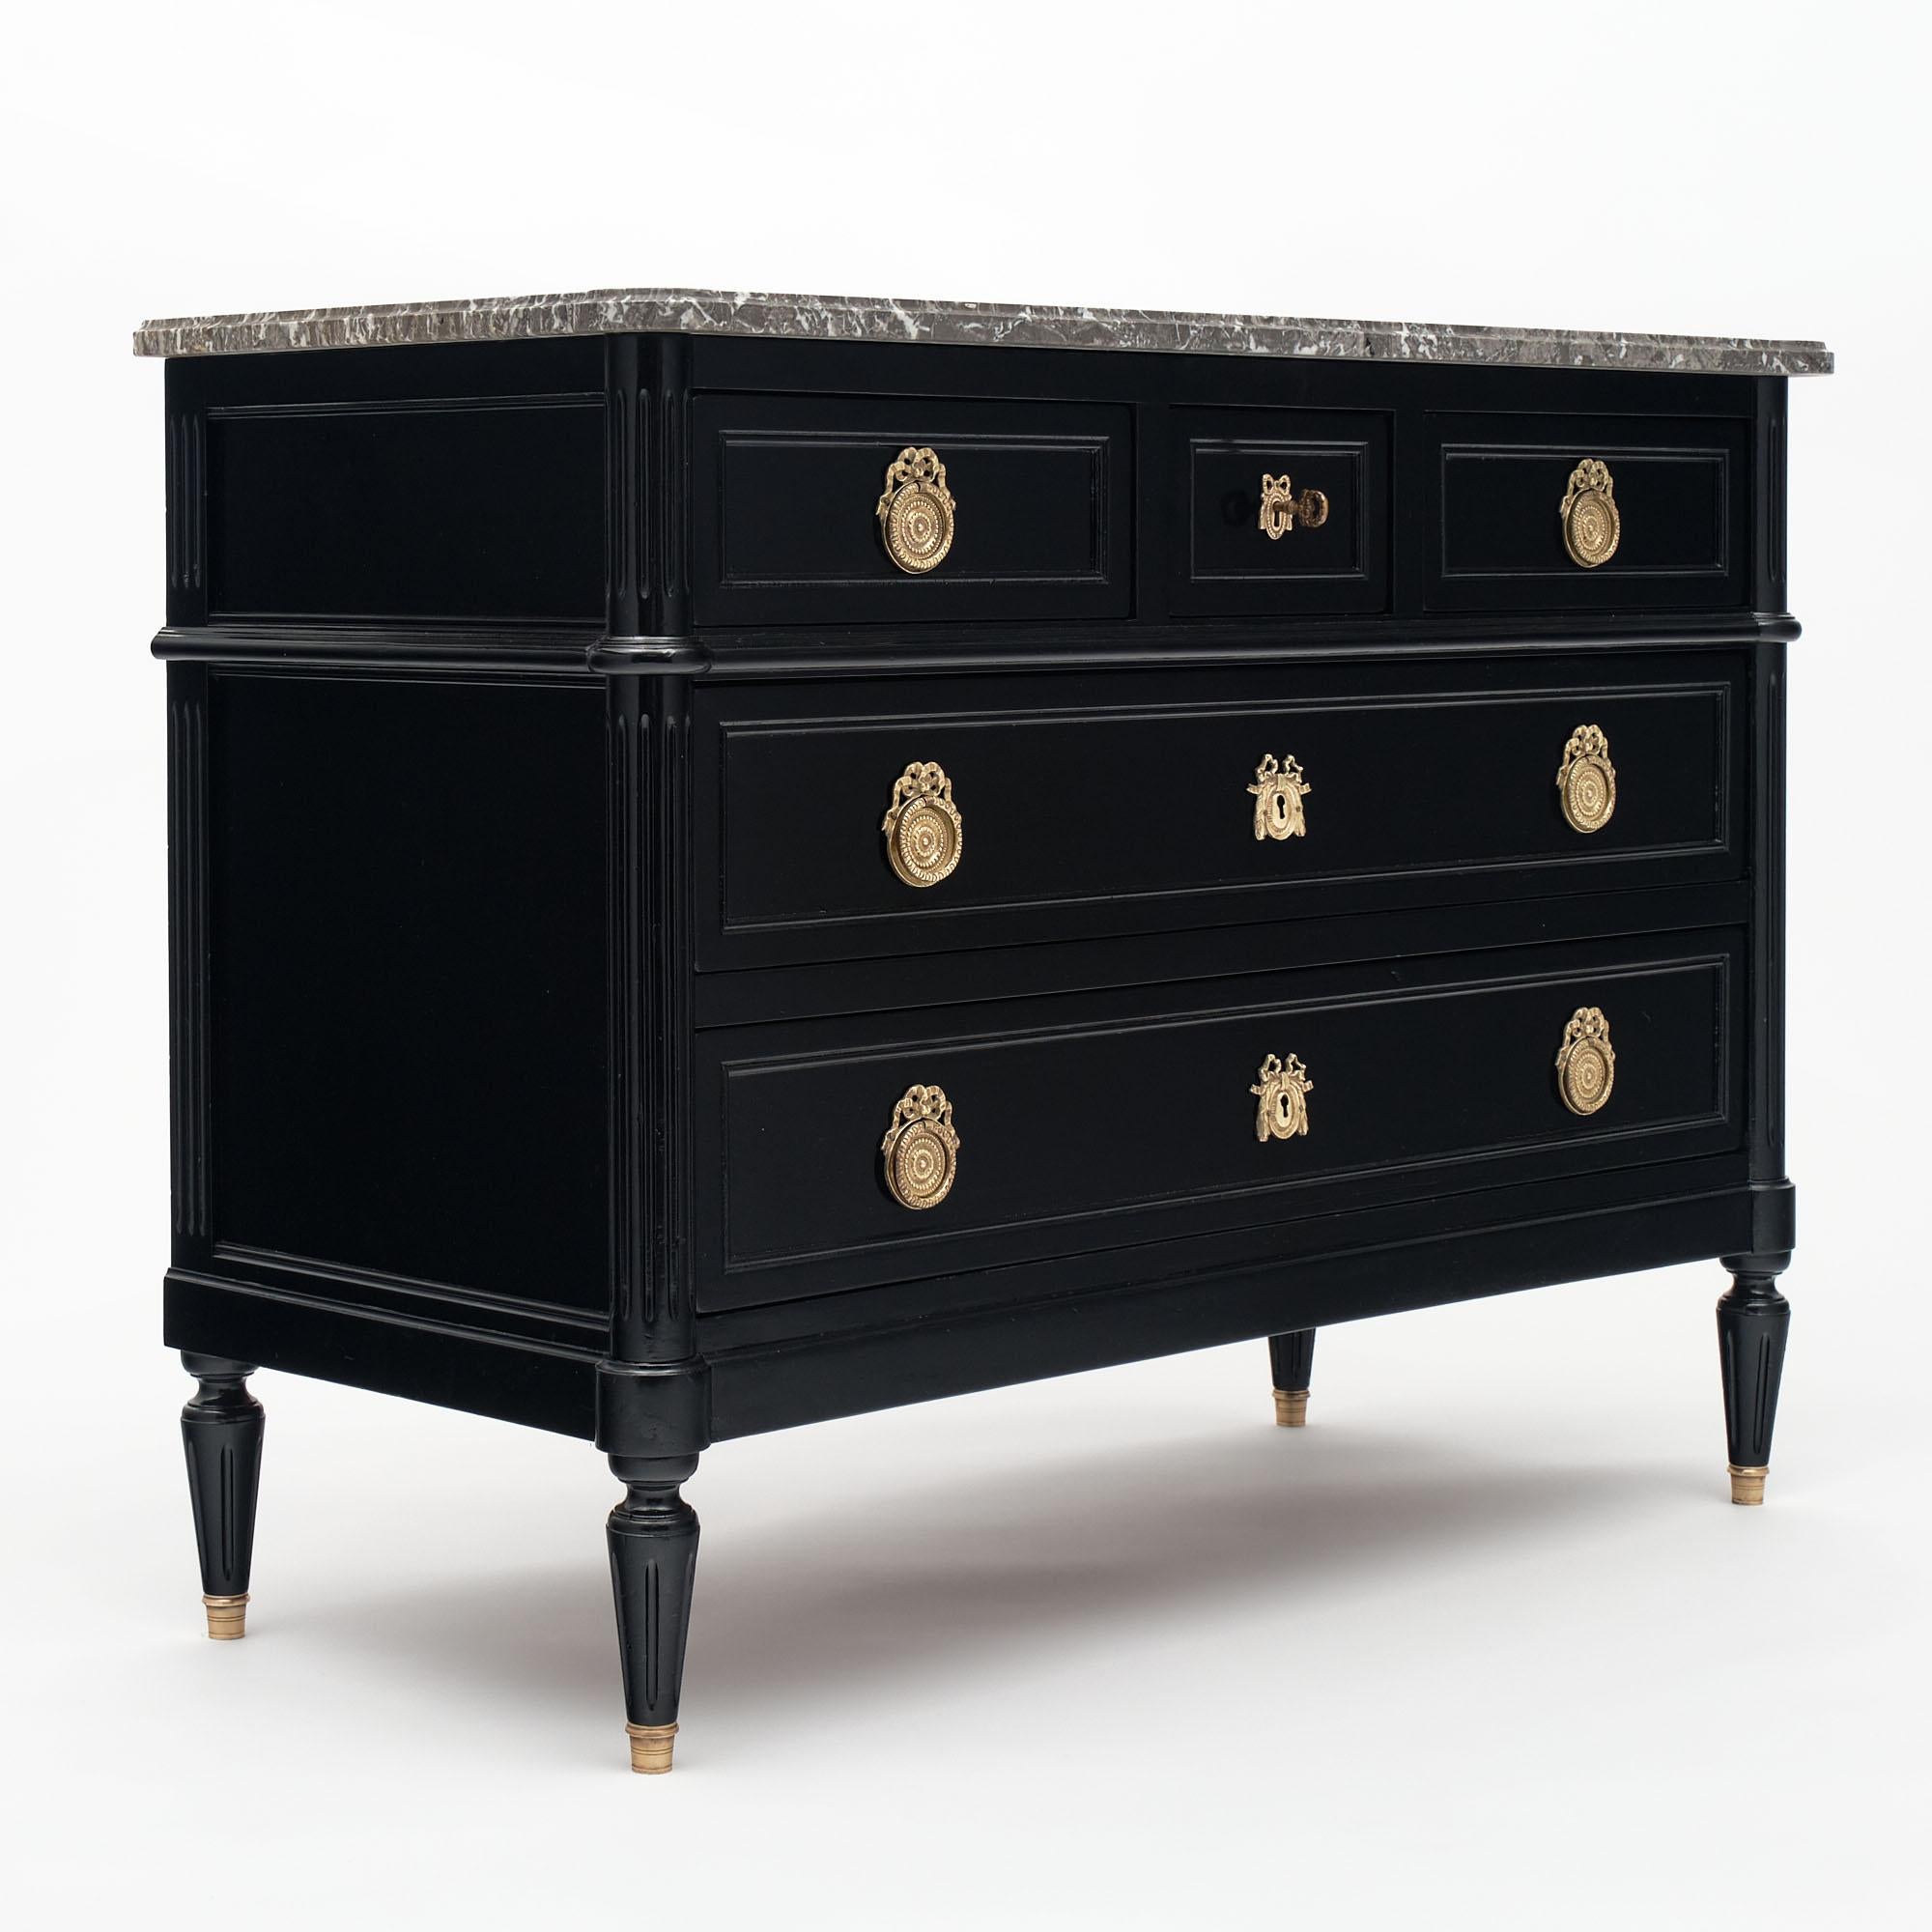 French chest of drawers in the Louis XVI style. This piece is made of cherrywood with a lustrous ebonized French polish finish. There are  5 dovetailed drawers with their original finely cast gilt  bronze hardware. The crowning beauty of this piece